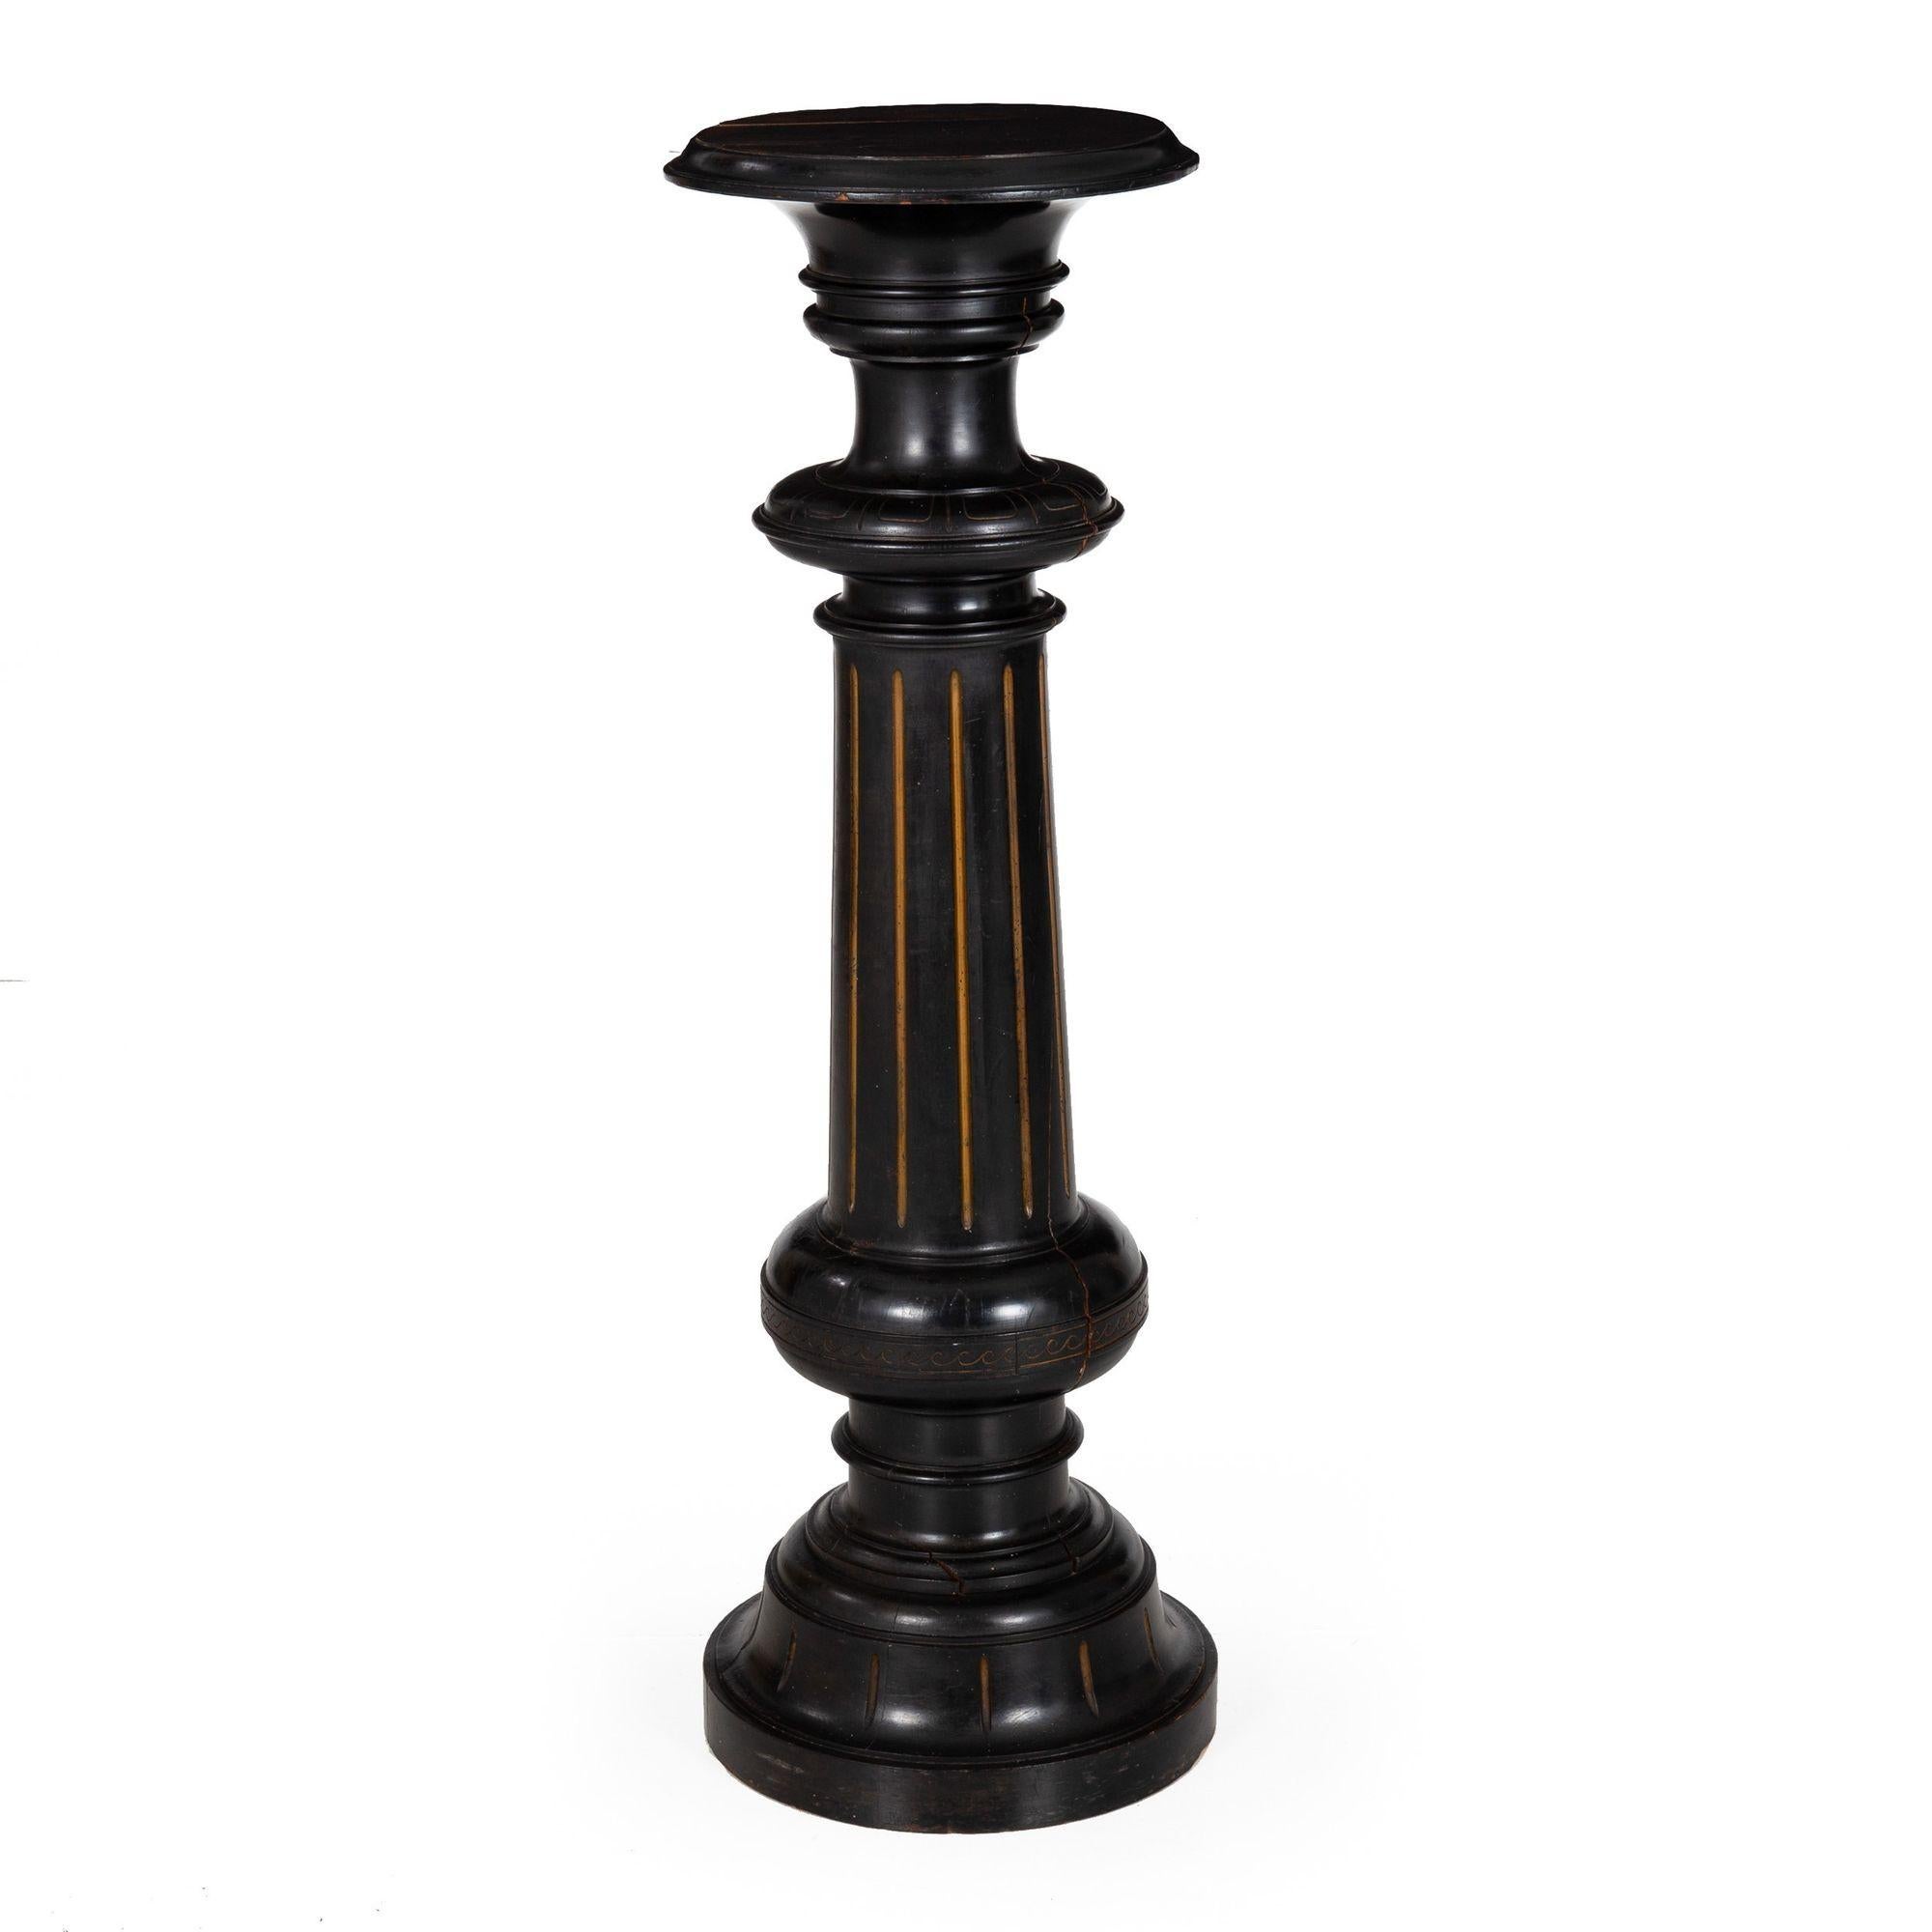 VICTORIAN GILT-INCISED AND EBONIZED PEDESTAL
Circa 1870
Item # 307XPP13L 

This useful and tasteful Victorian period sculpture pedestal features an overall nearly black ebonized surface with gilded fluting around the column and base and repeating